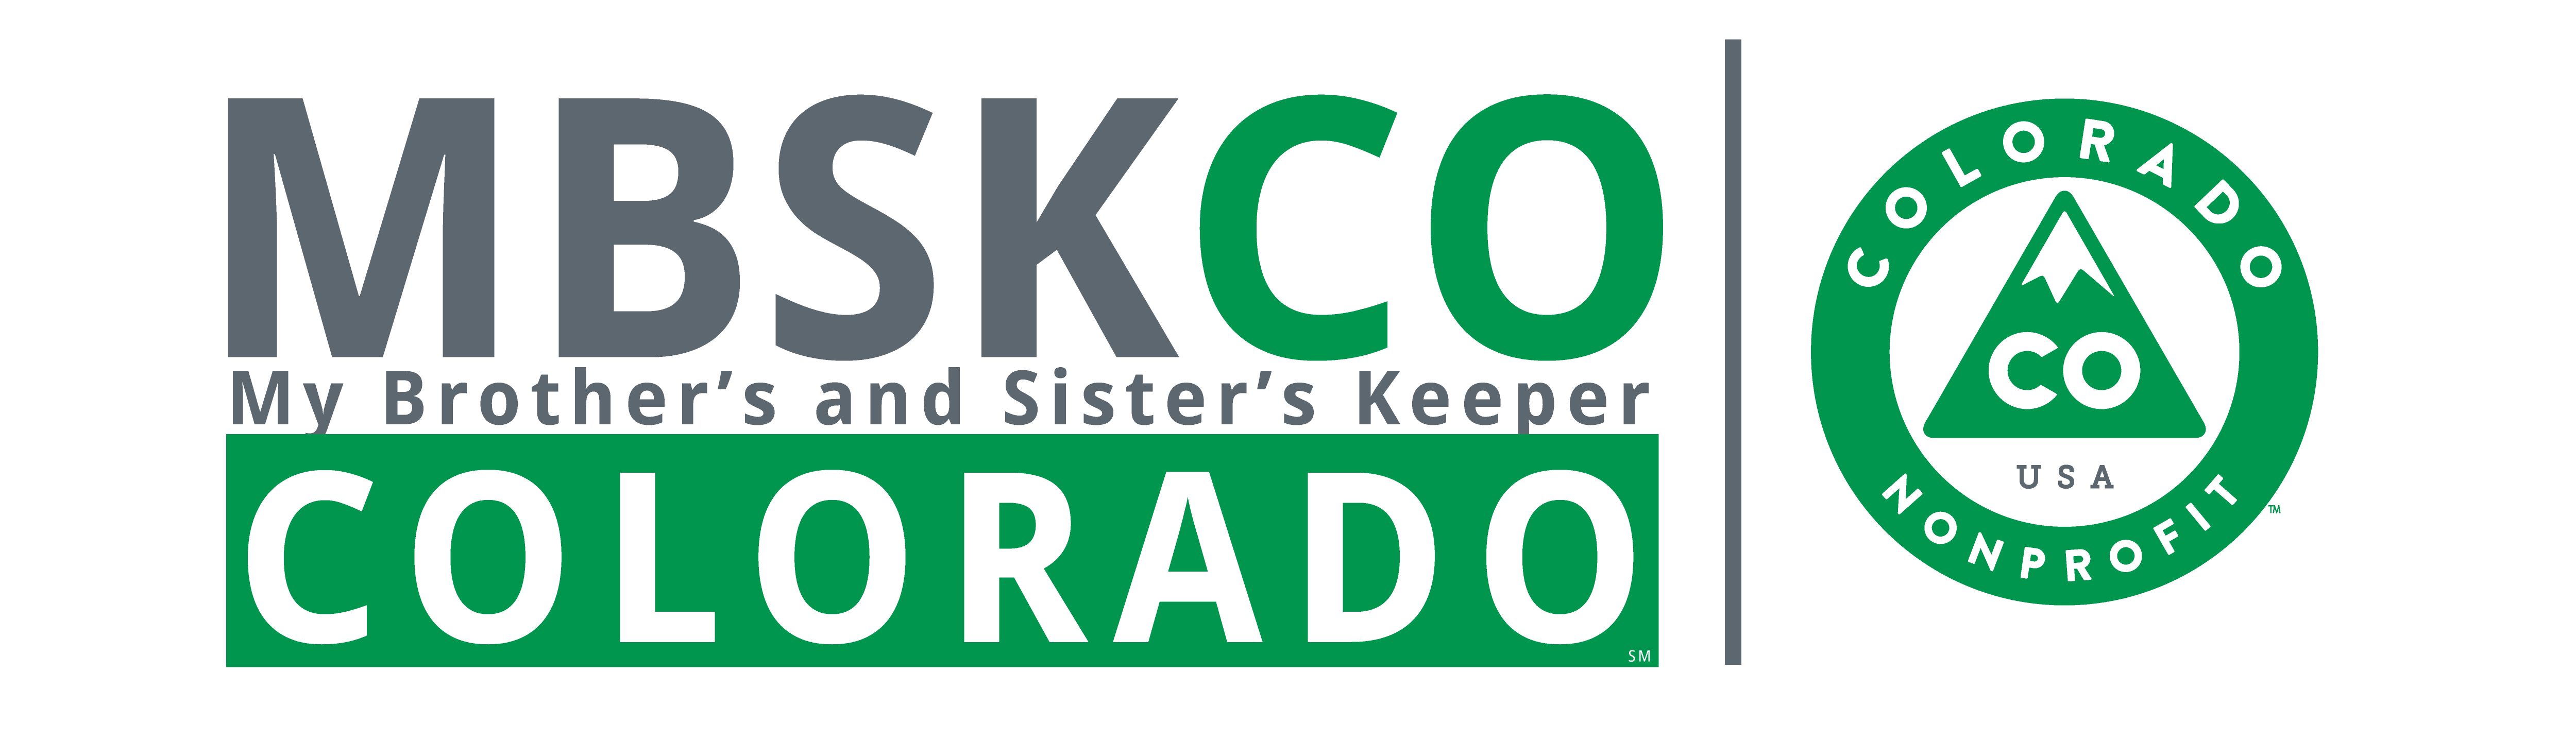 My Brother's and Sister's Keeper Colorado logo